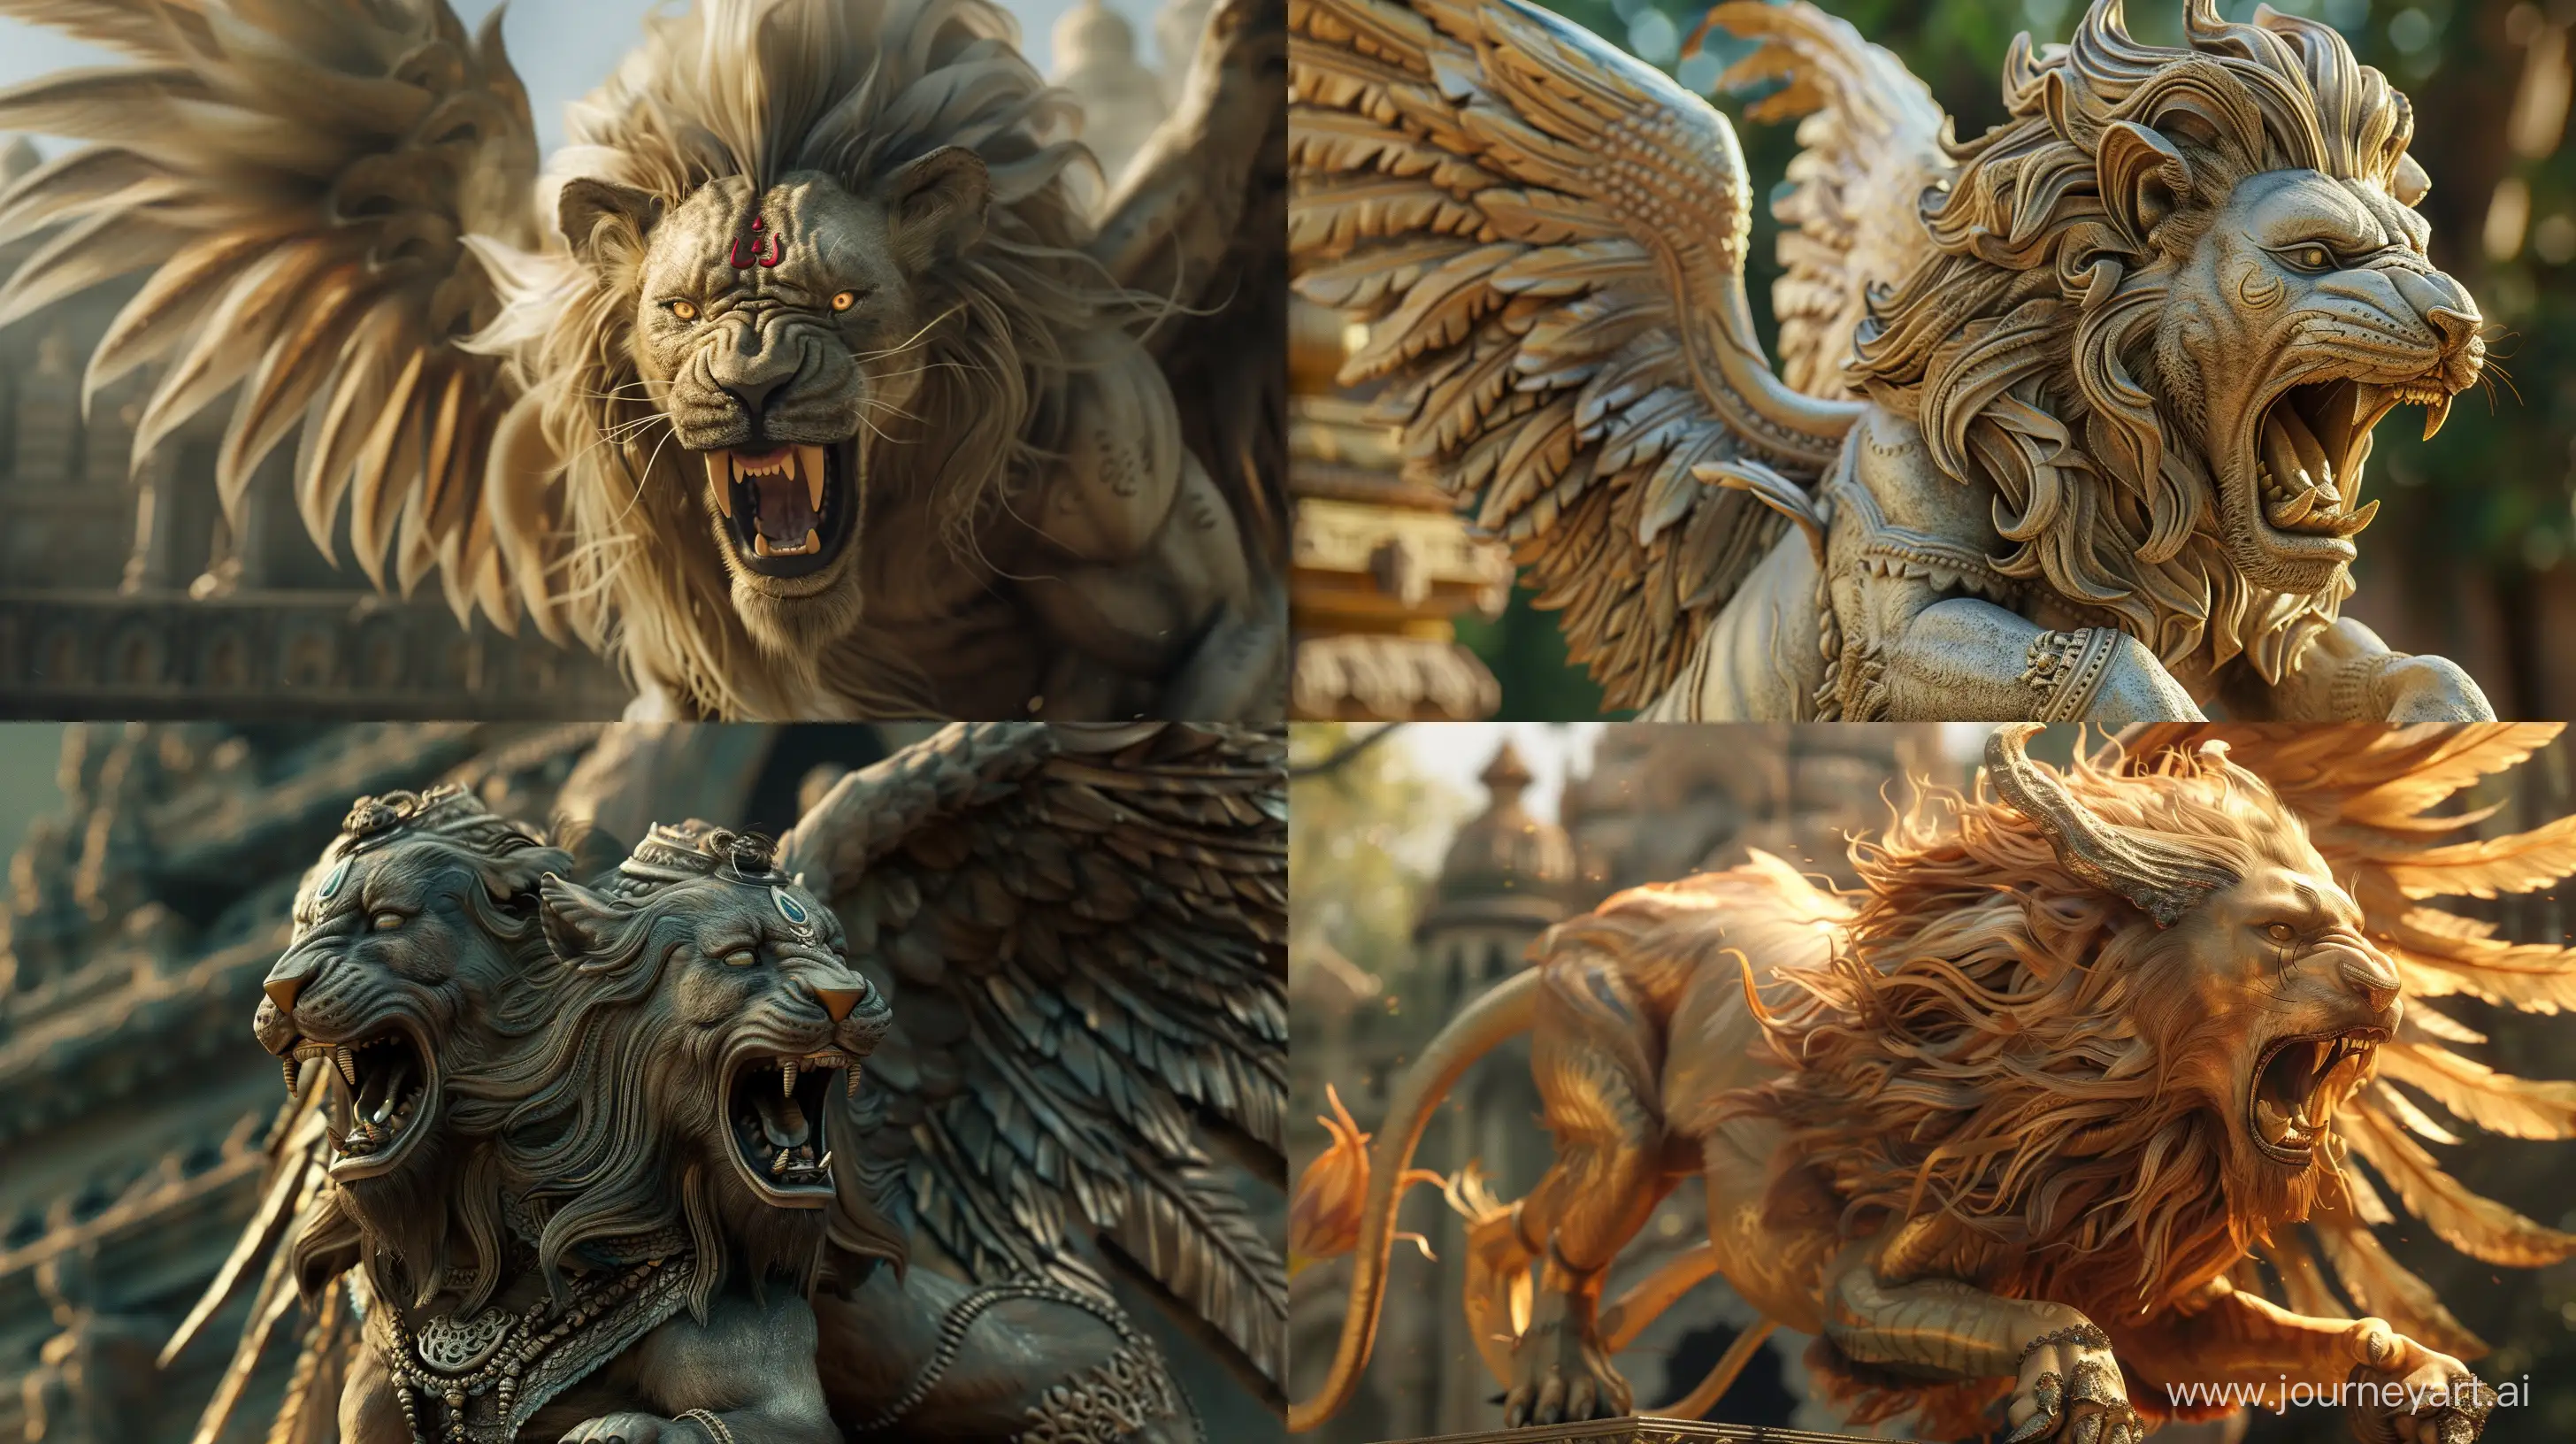 Majestic-Hindu-Mythical-Creature-Lion-with-Wings-in-Fierce-Roaring-Pose